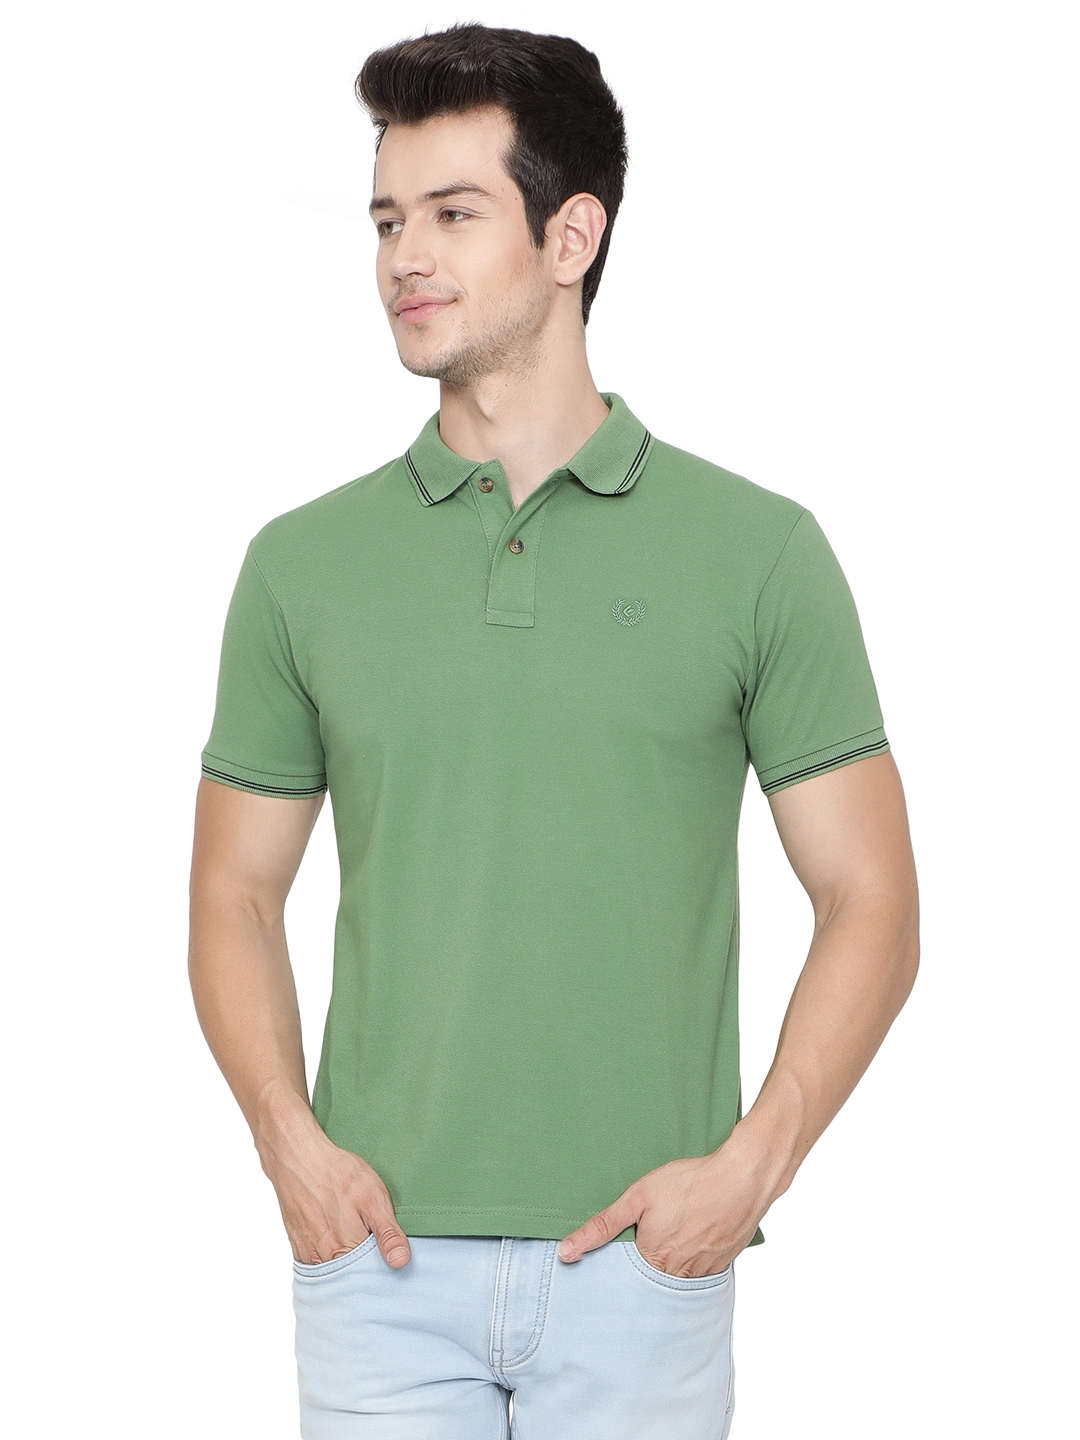 Greenfibre | Turf Green Solid Slim Fit Polo T-Shirt | Greenfibre